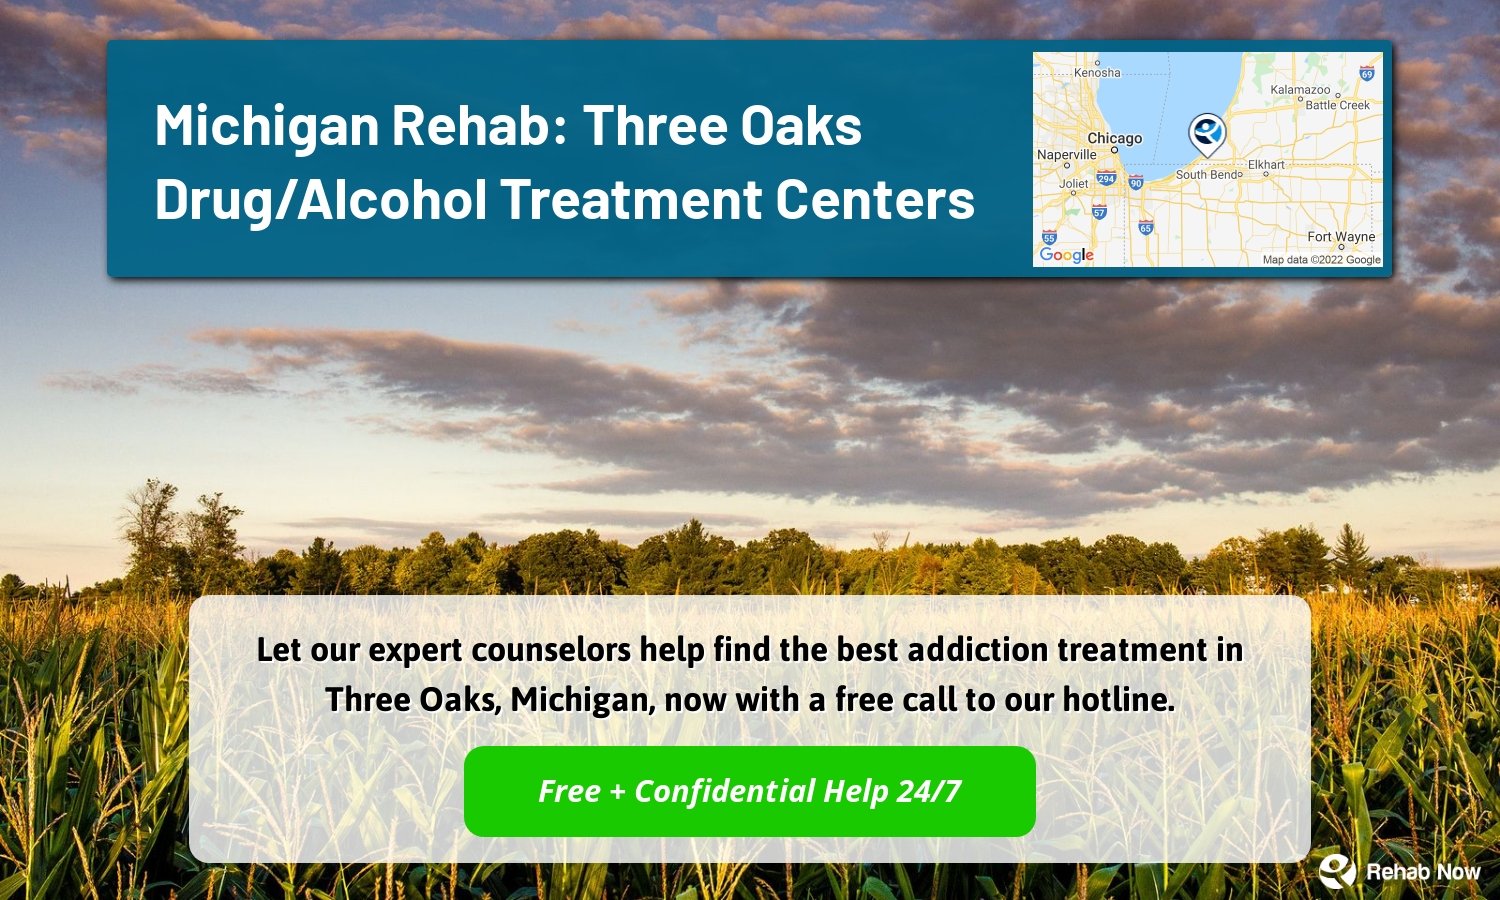 Let our expert counselors help find the best addiction treatment in Three Oaks, Michigan, now with a free call to our hotline.